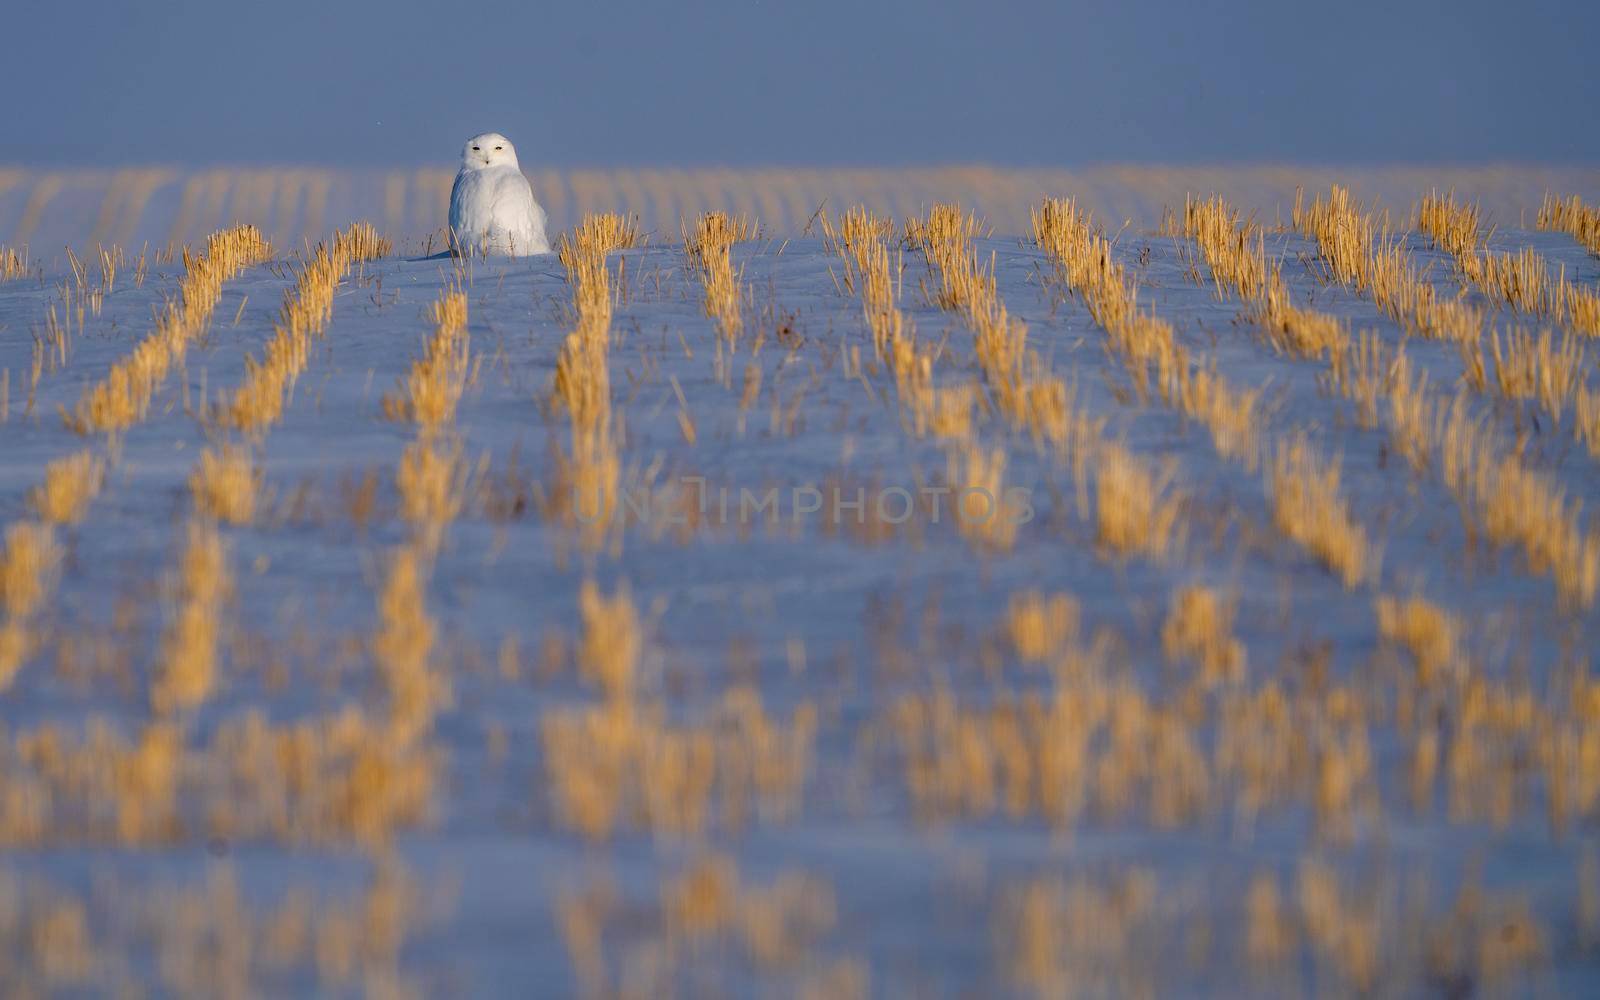 Snowy Owl WInter by pictureguy